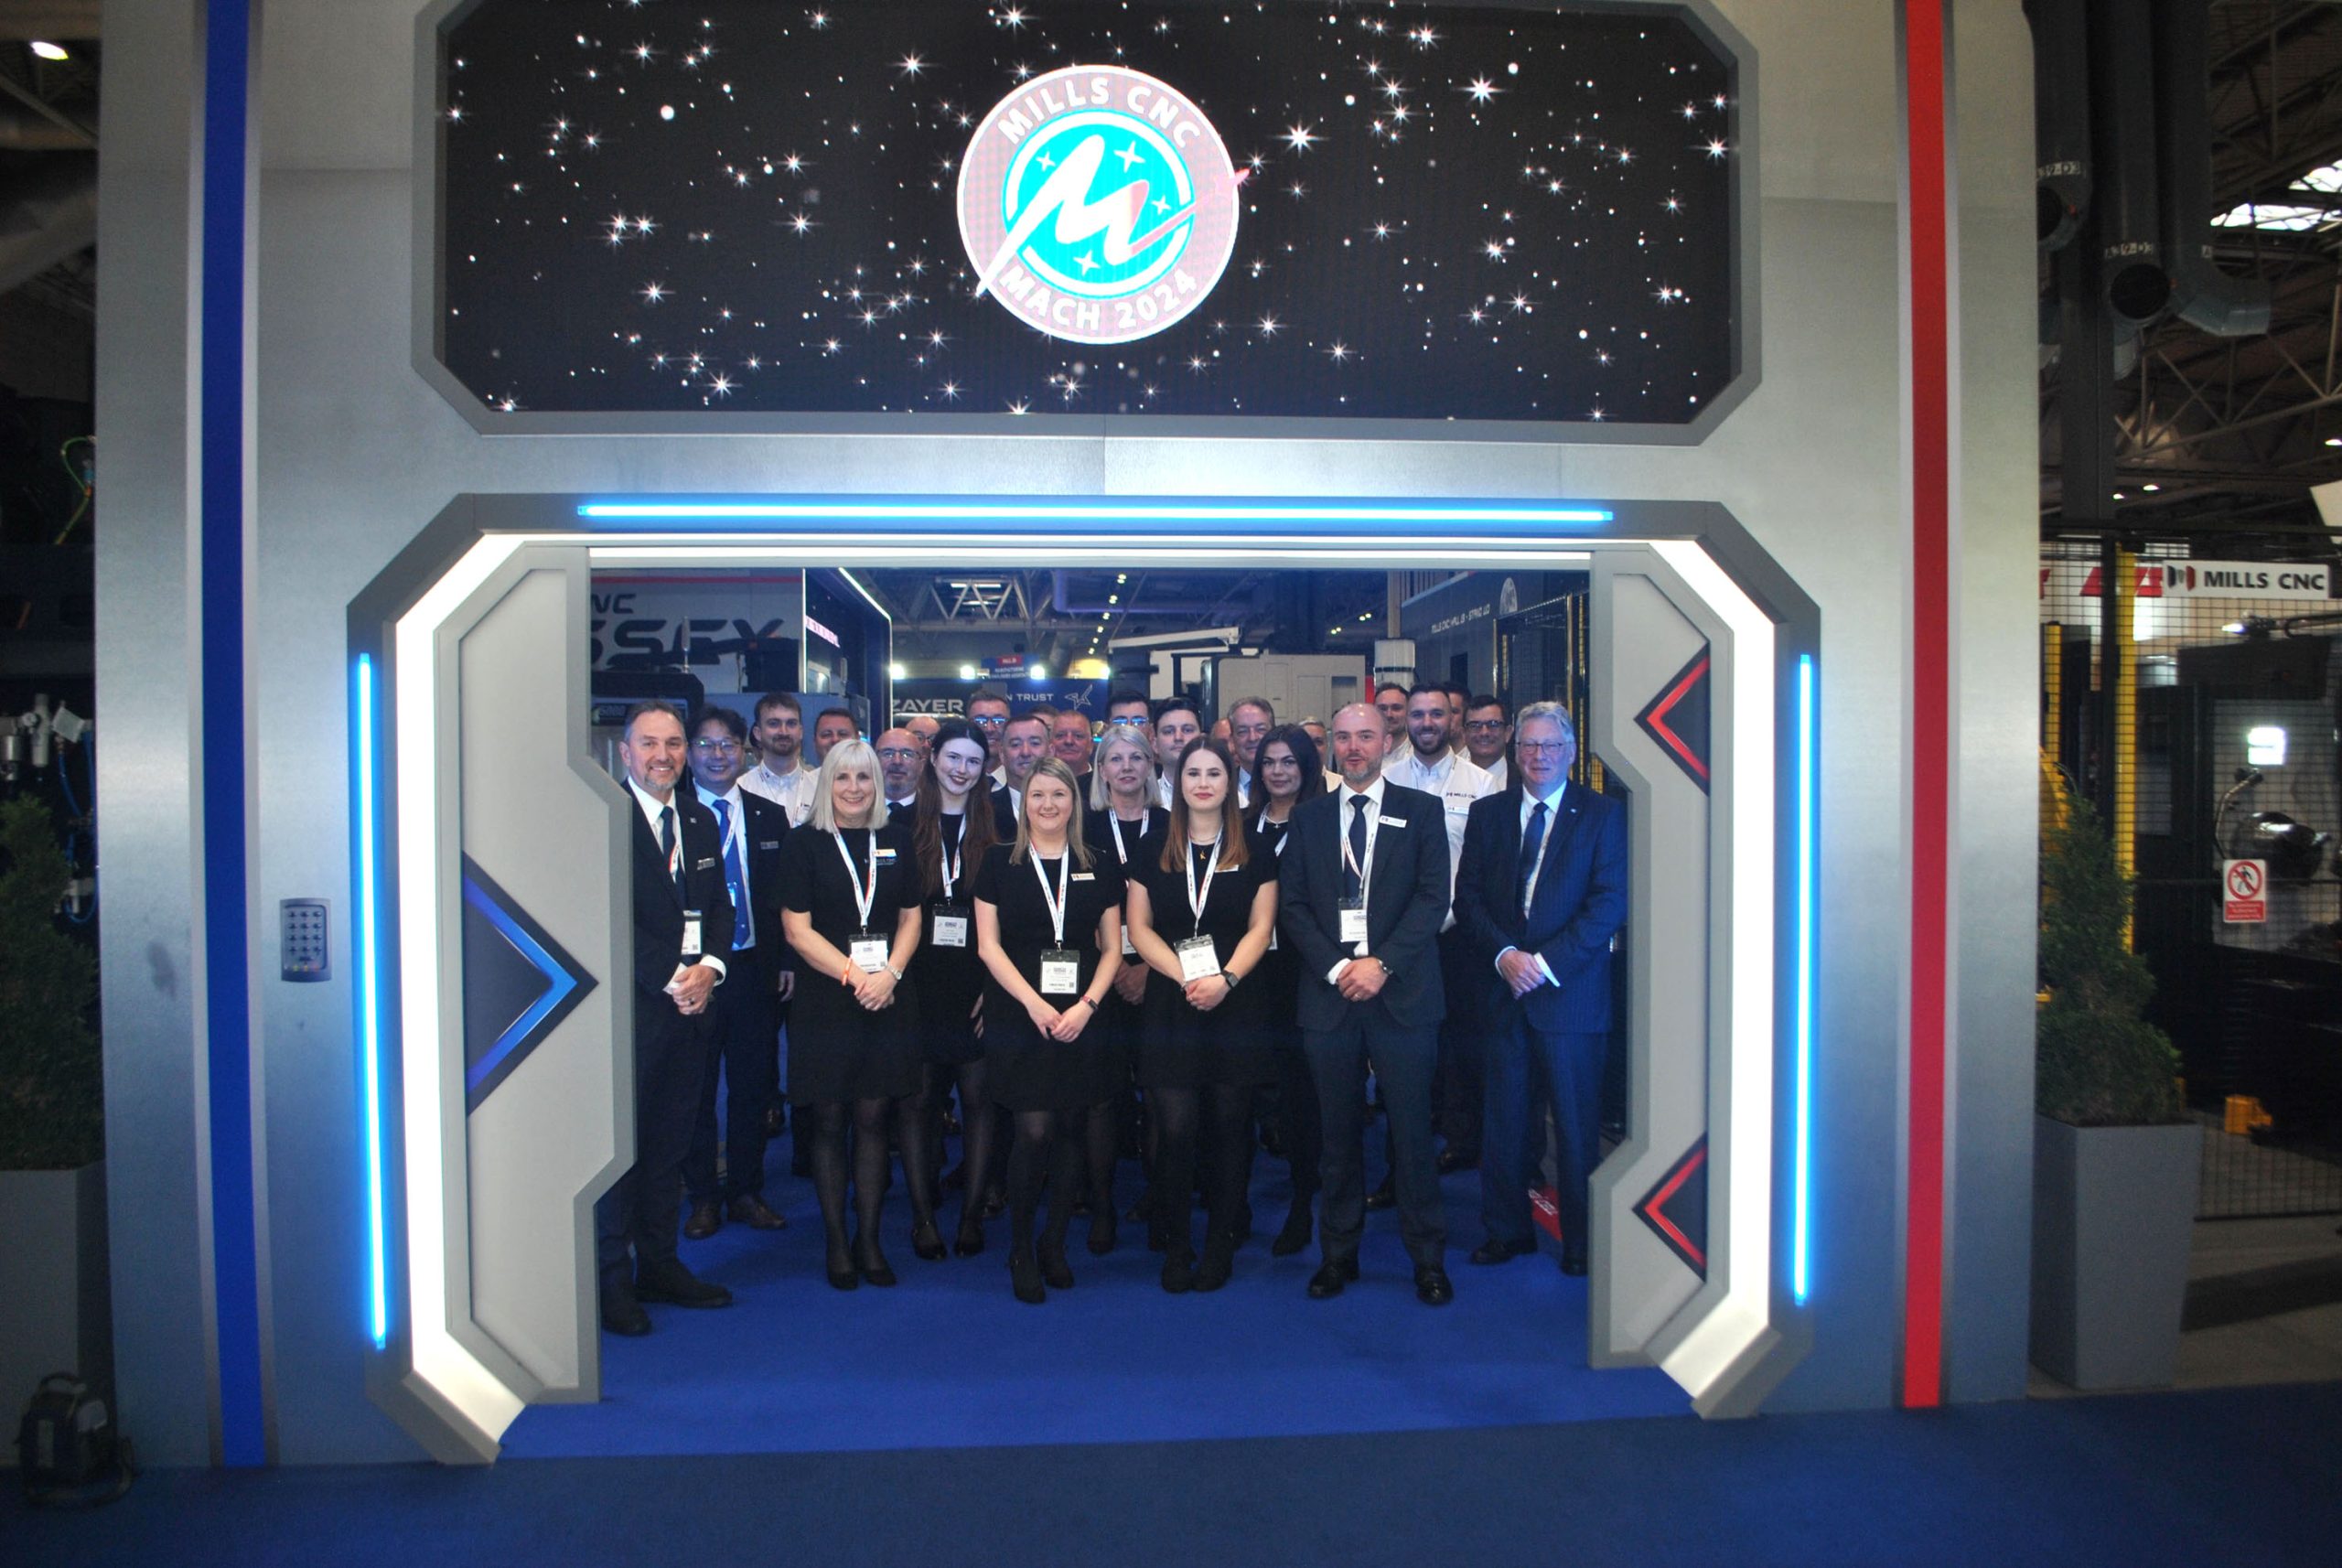 Mills CNC team stand under the entrance to their stand at MACH 2024